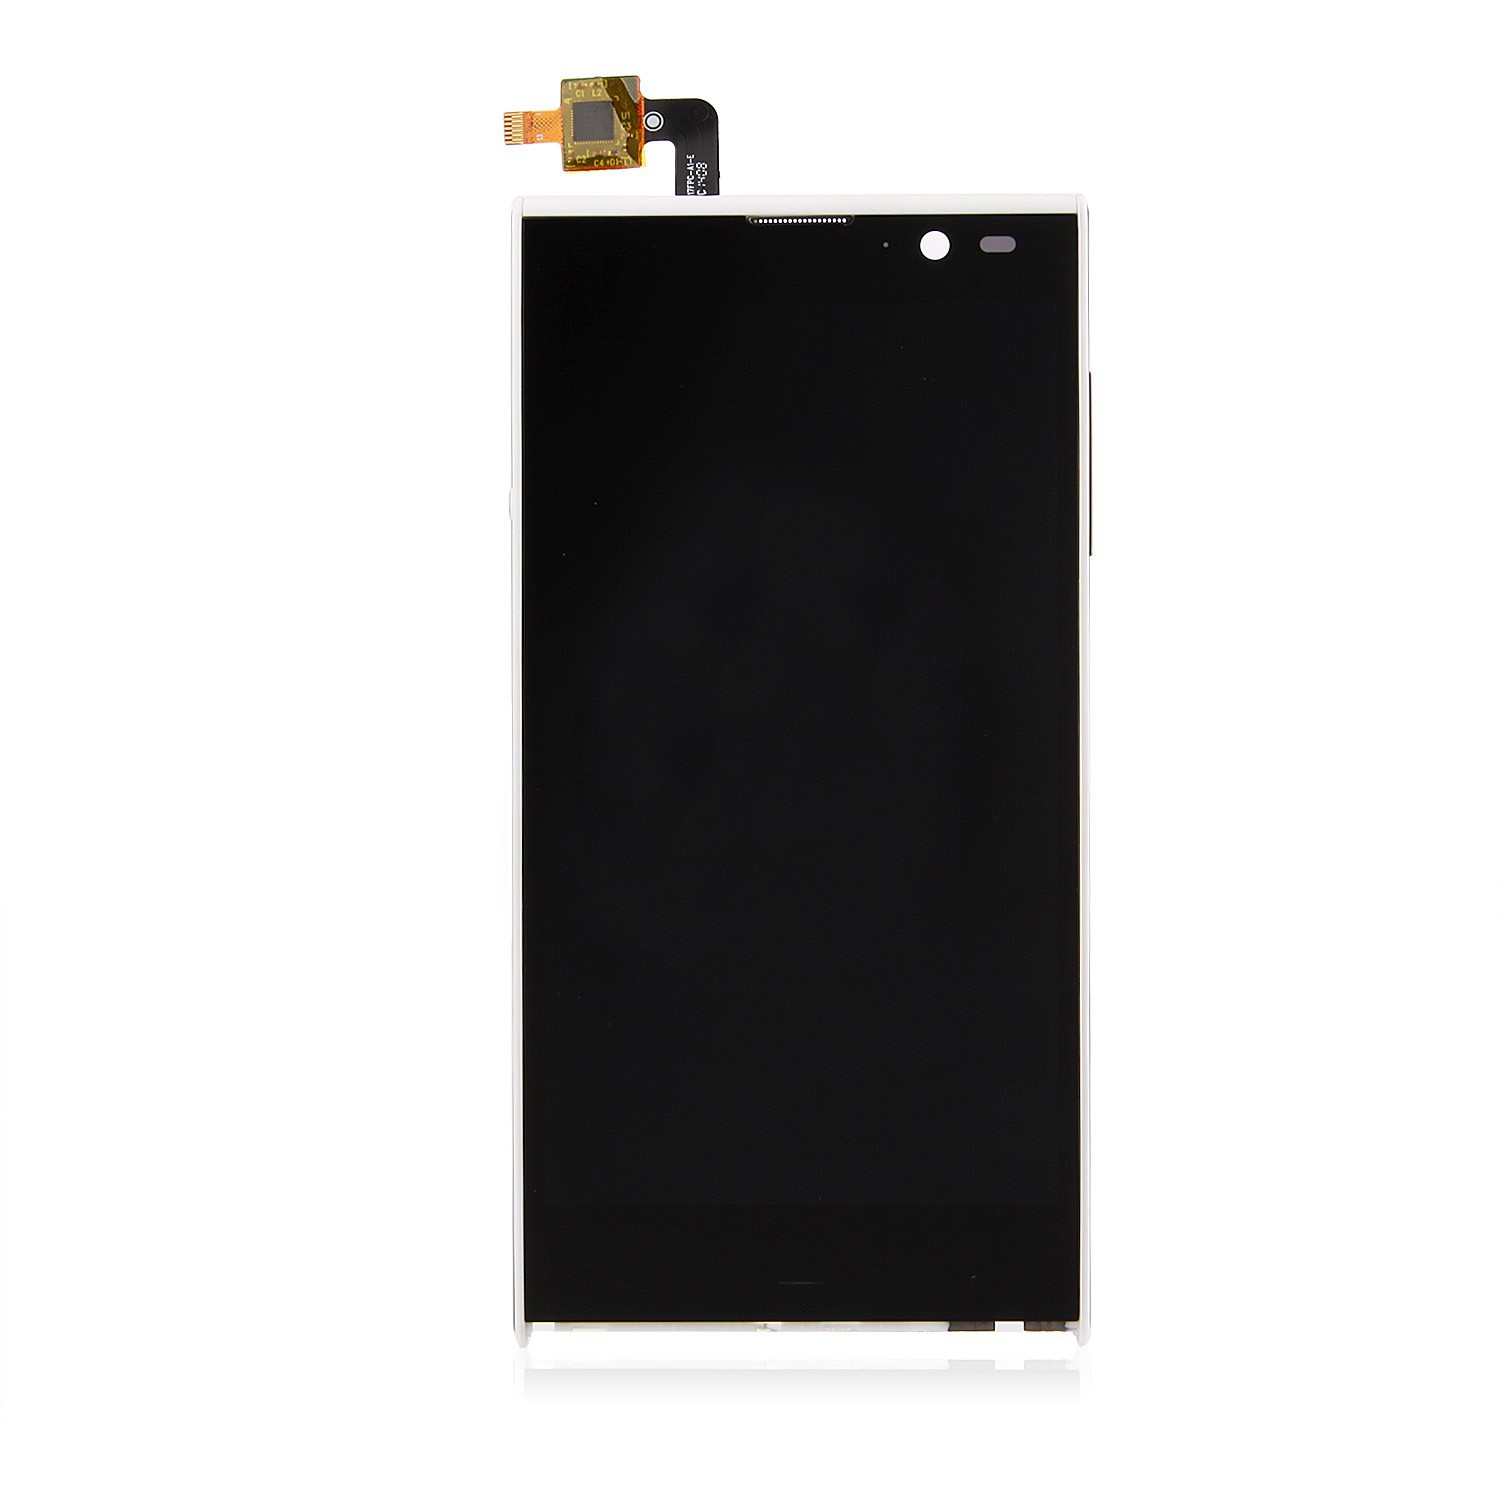 Nokia tab and tablet Display Repair and Replacement In Chennai